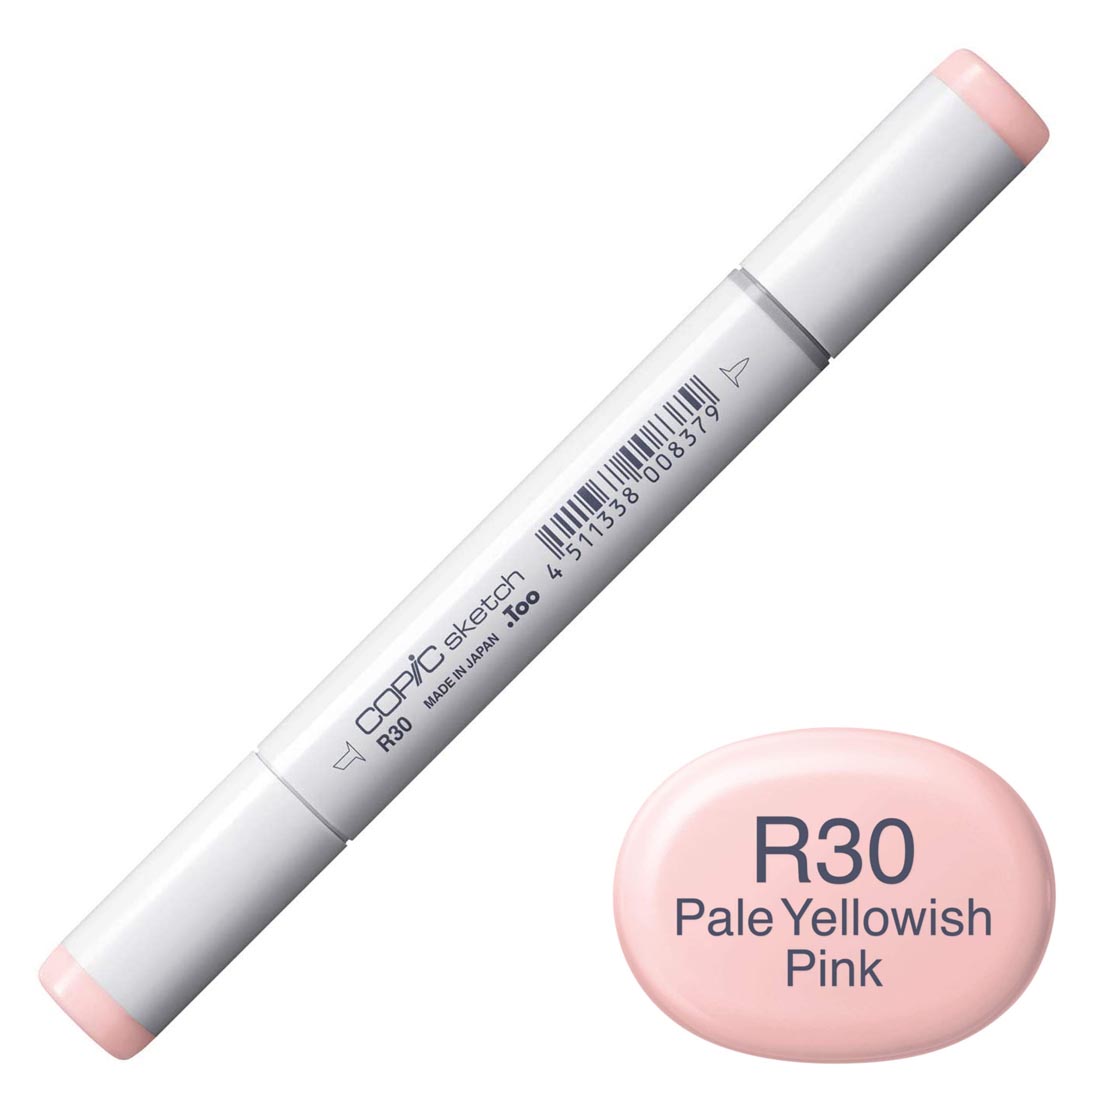 COPIC Sketch Marker with a color swatch and text of R30 Pale Yellowish Pink